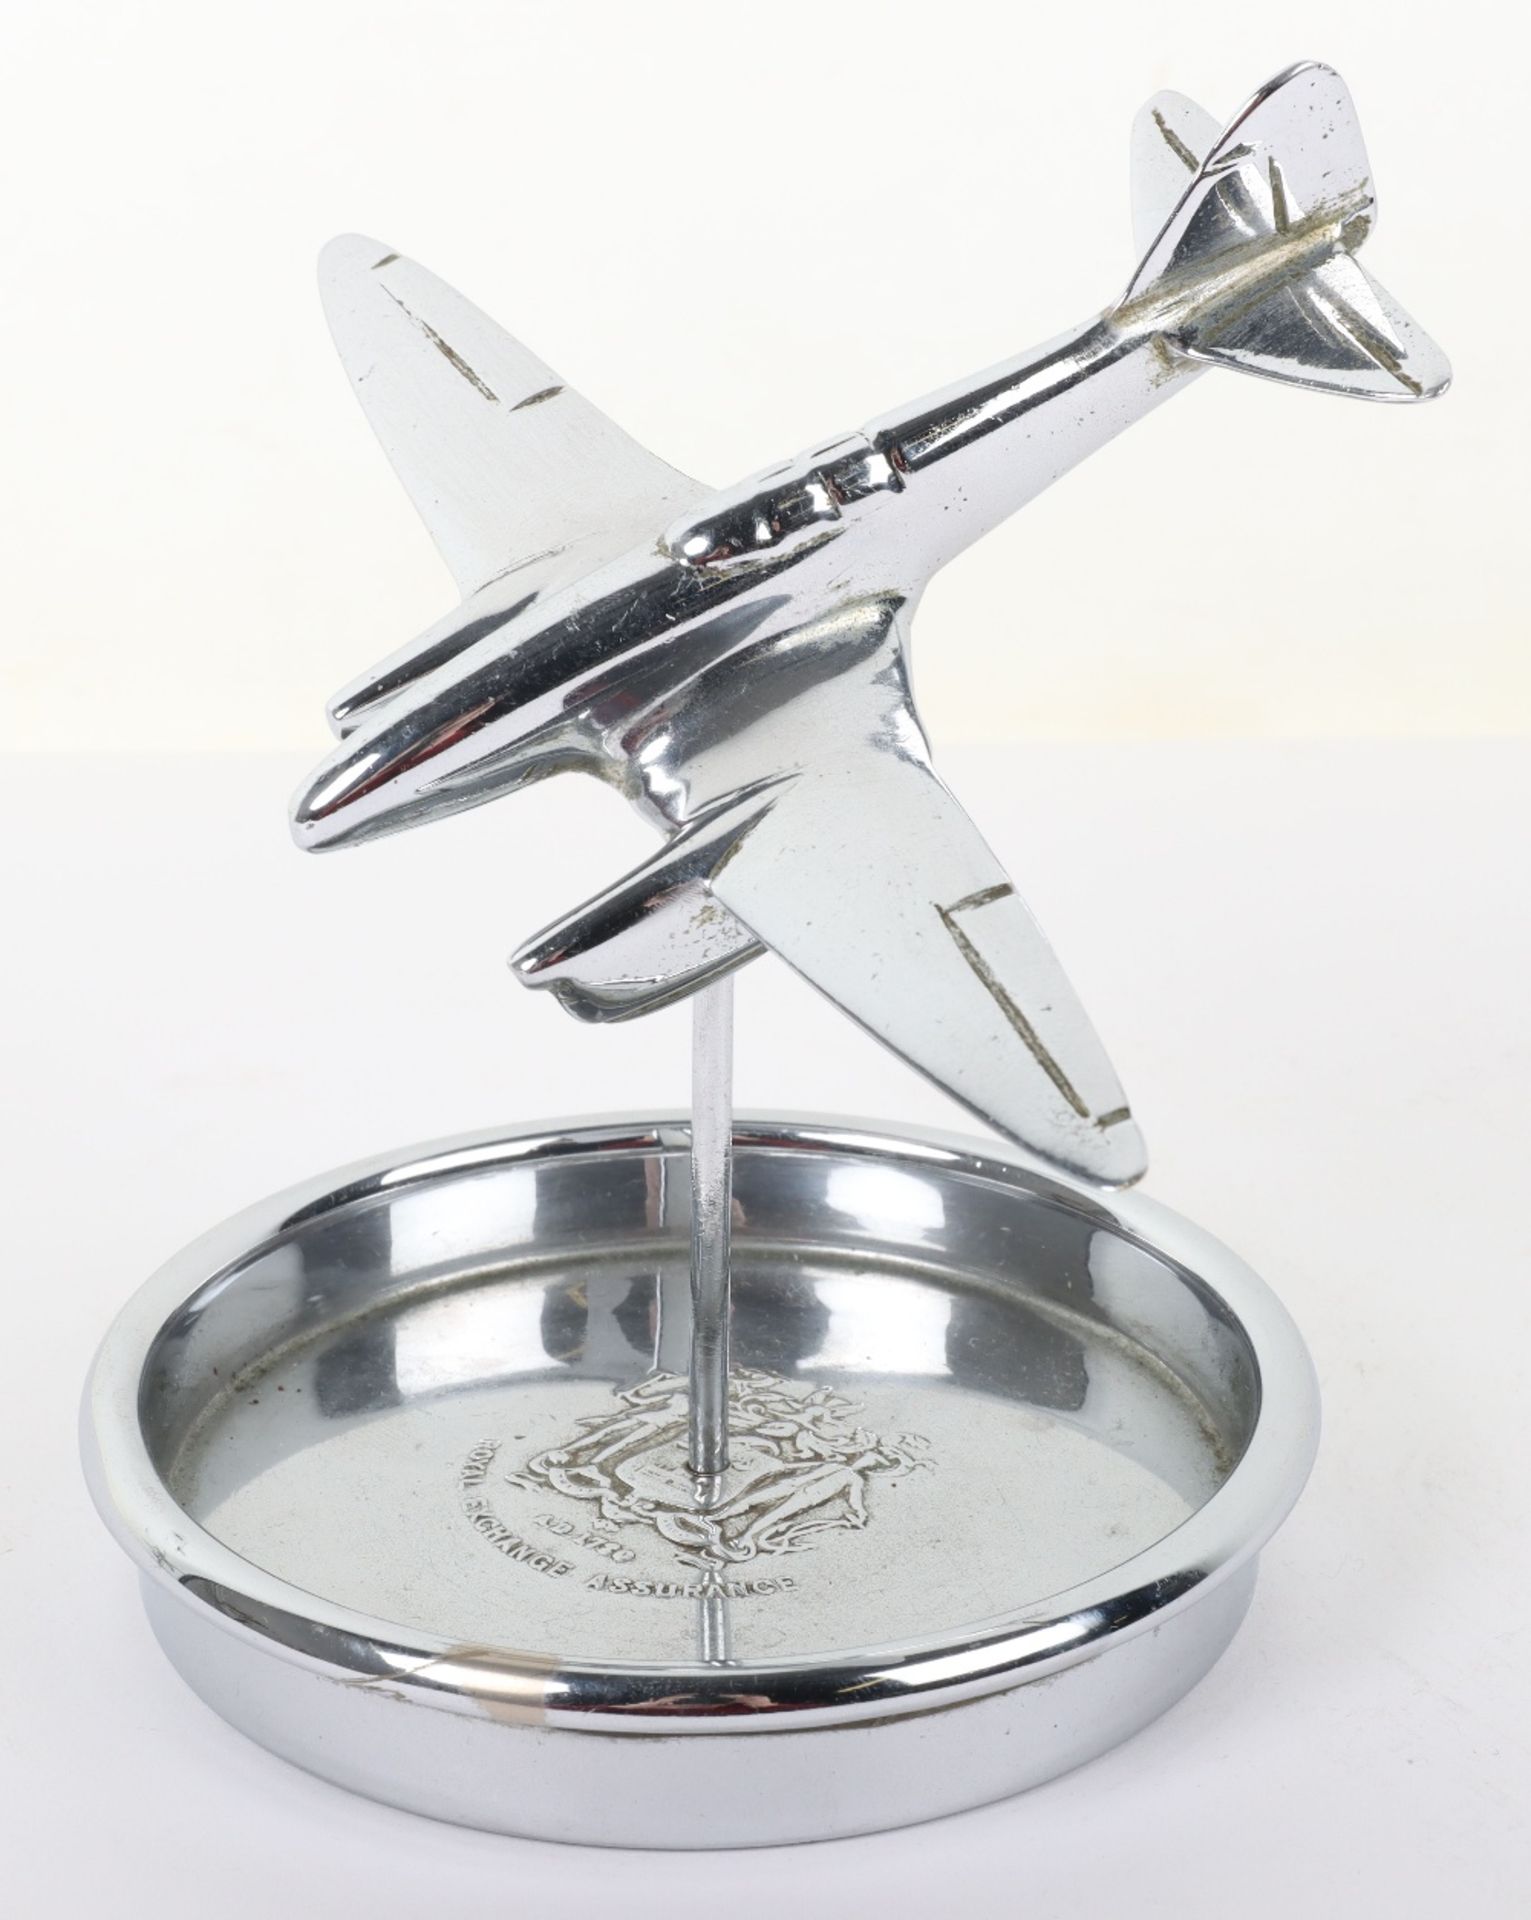 Desk Ashtray with Model of a WW2 Dive Fighter Bomber in Flight - Image 4 of 7